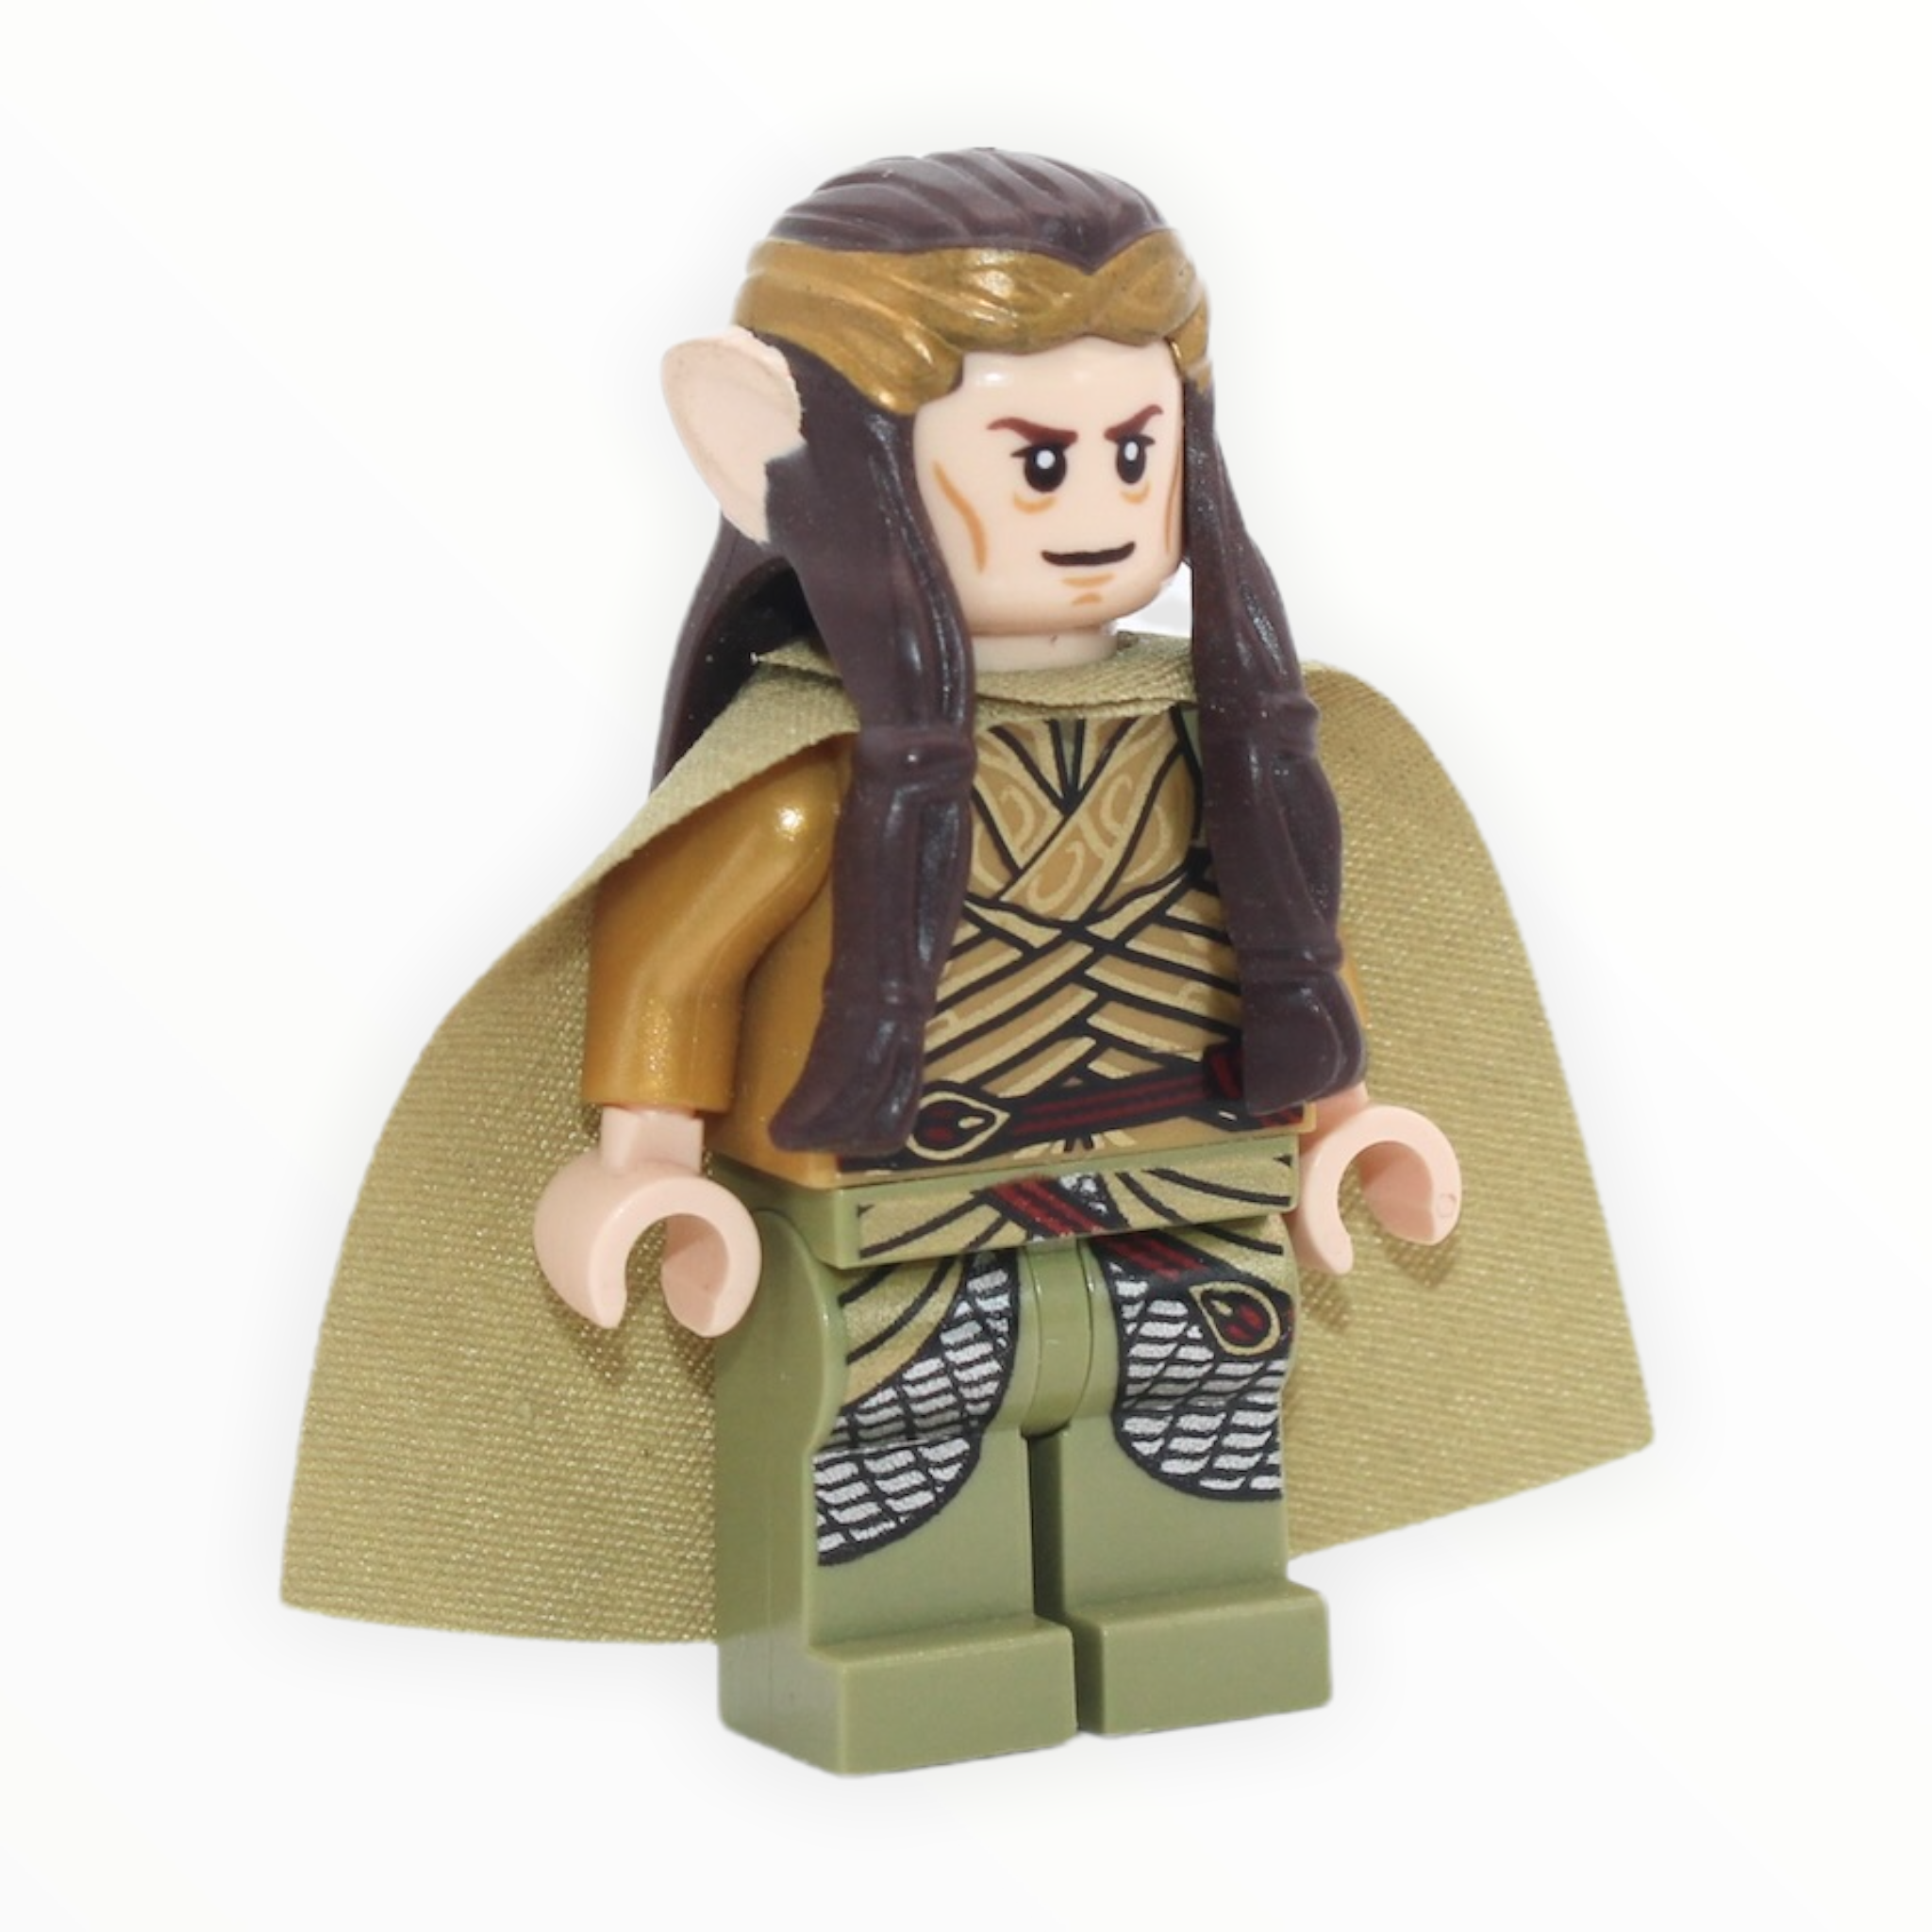 Elrond (gold crown, gold and olive green clothing, olive green cape, 2014)